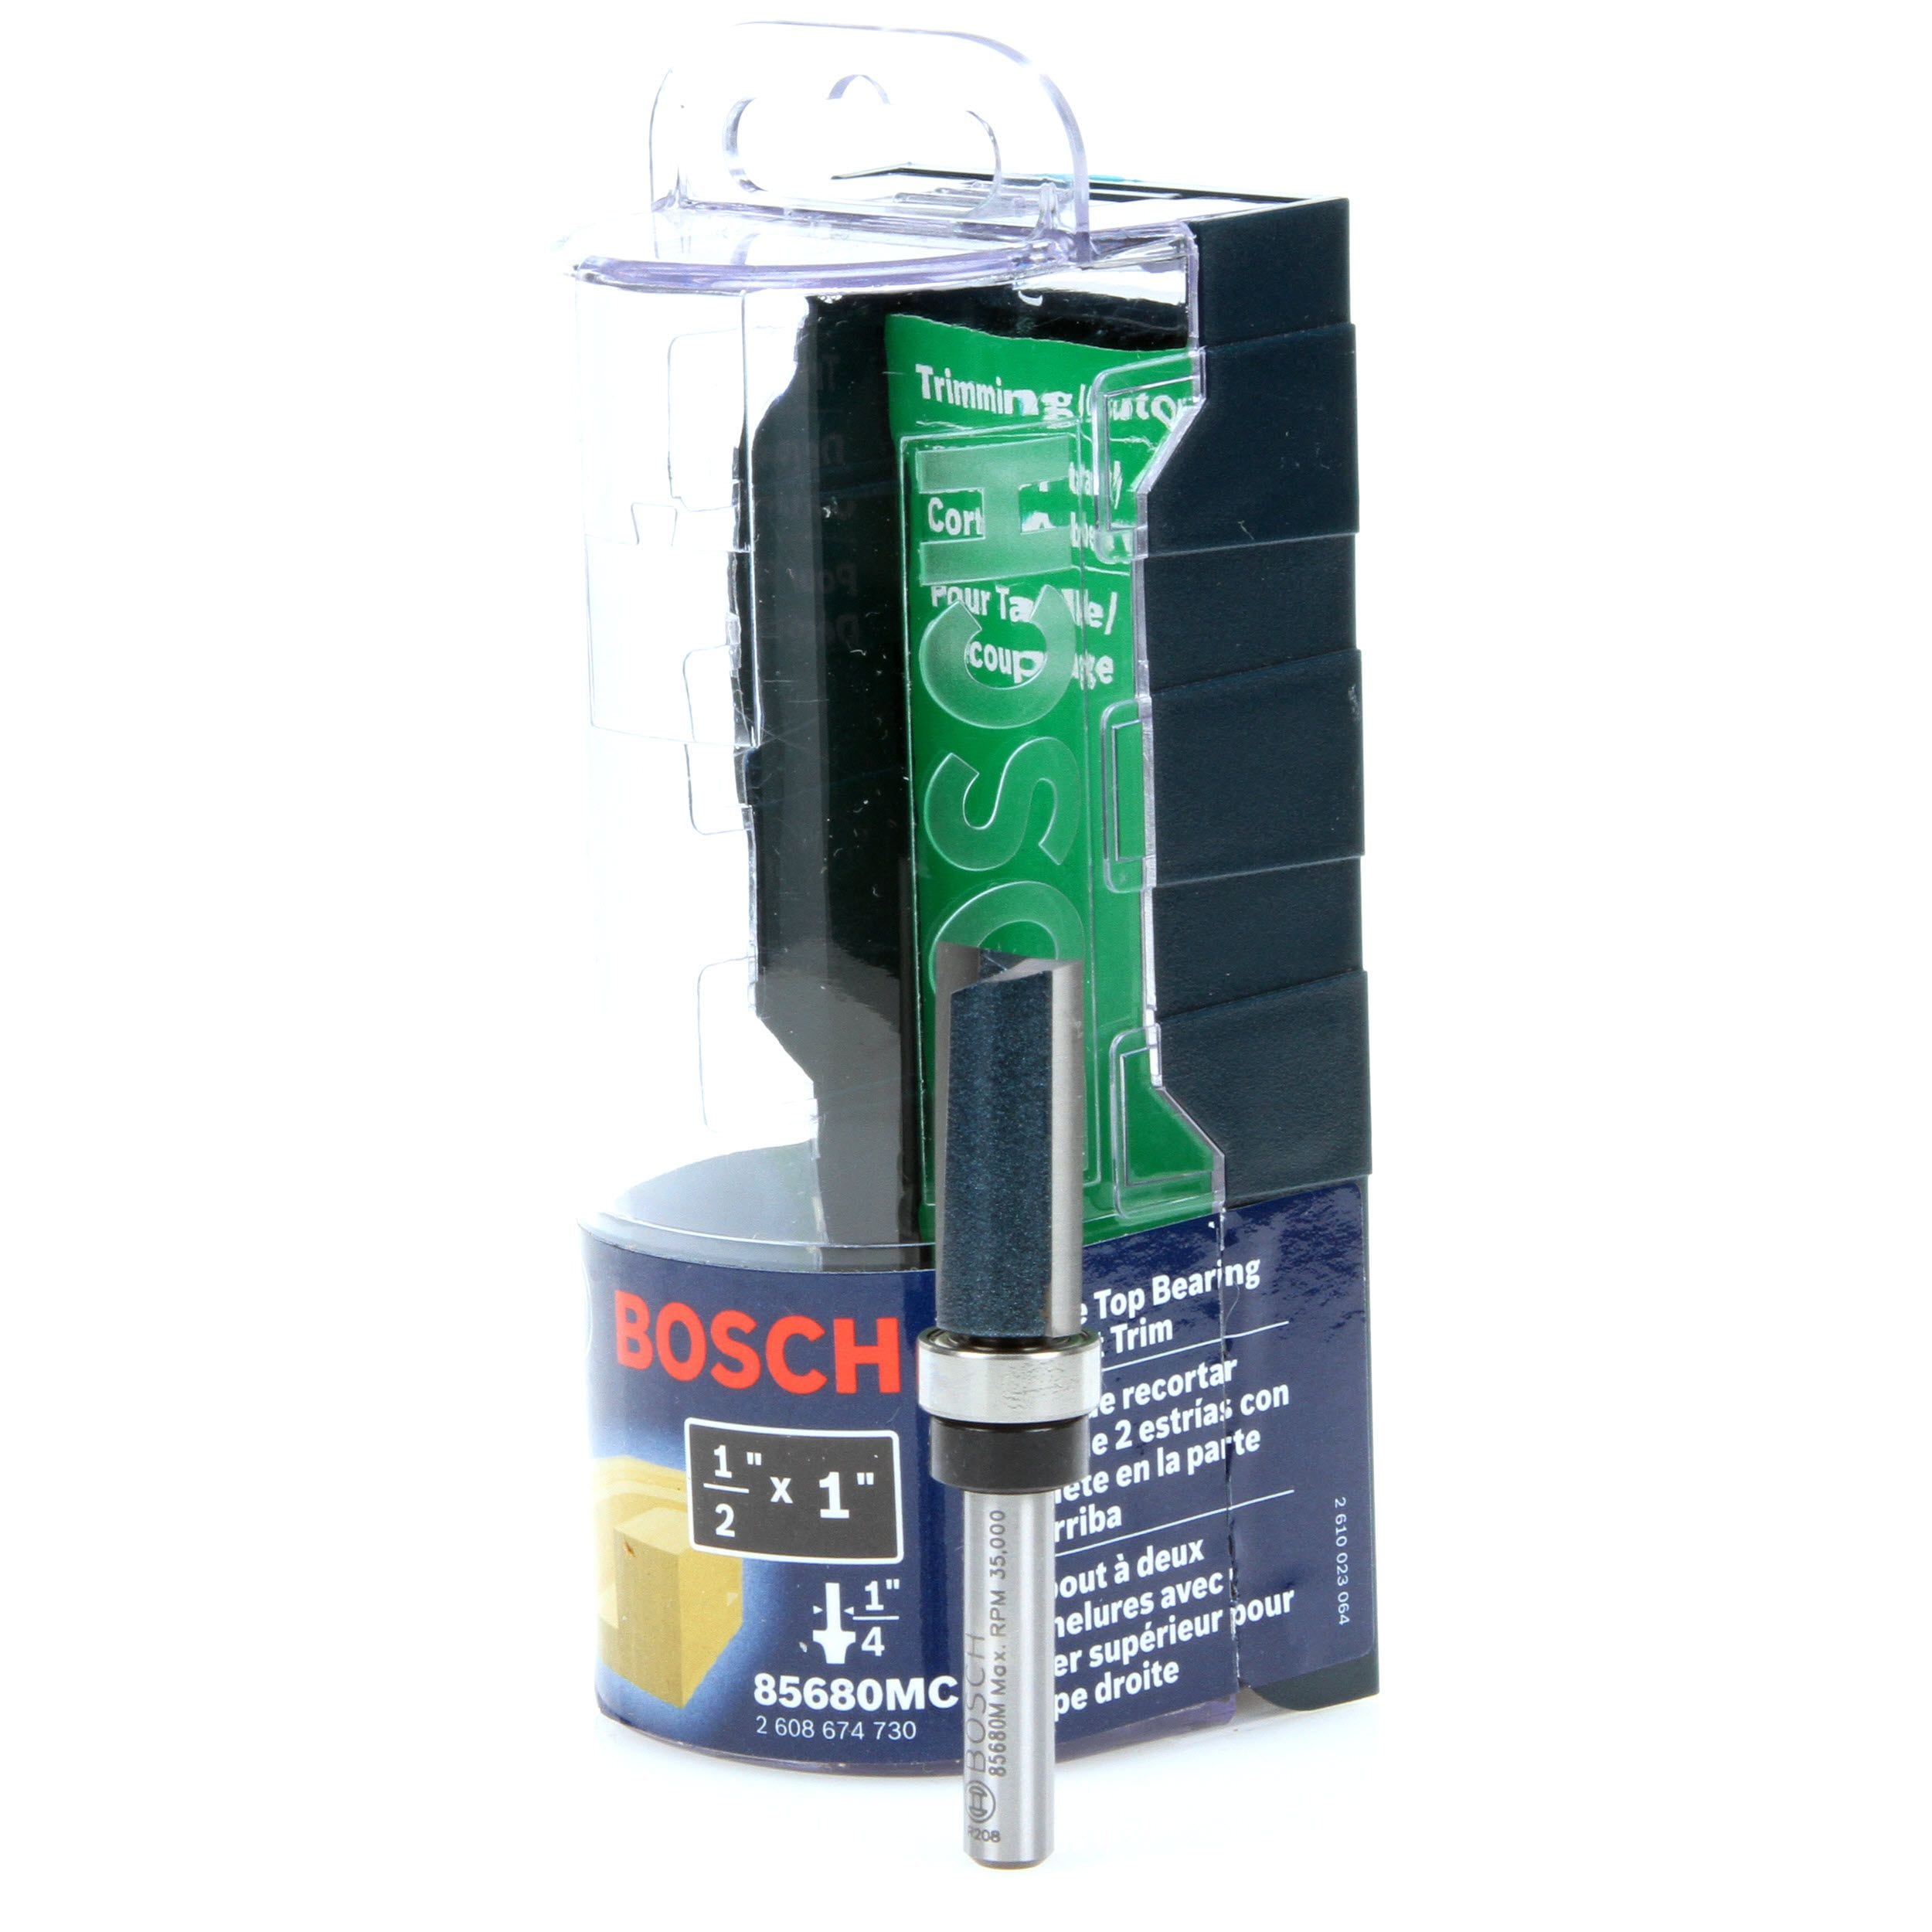 x 1 In Bosch 85680MC 1/2 In Carbide-Tipped Double-Flute Top-Bearing Straight Trim Router Bit 